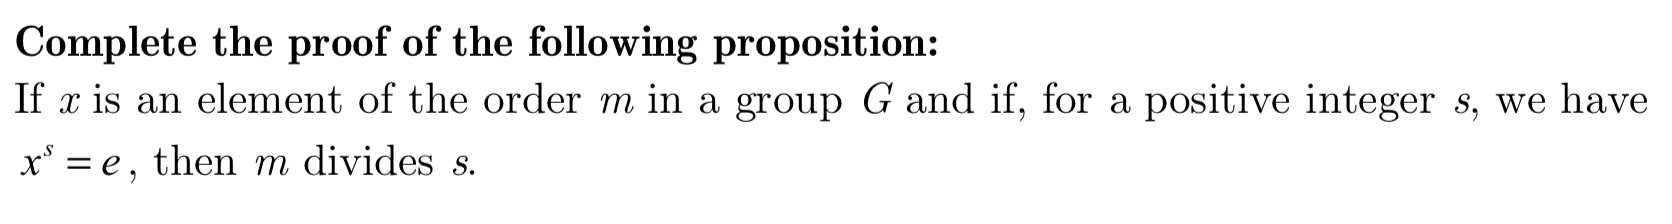 Complete the proof of the following proposition:
If x is an element of the order m in a group G and if, for a positive integer s, we have
xe then m divides s.
